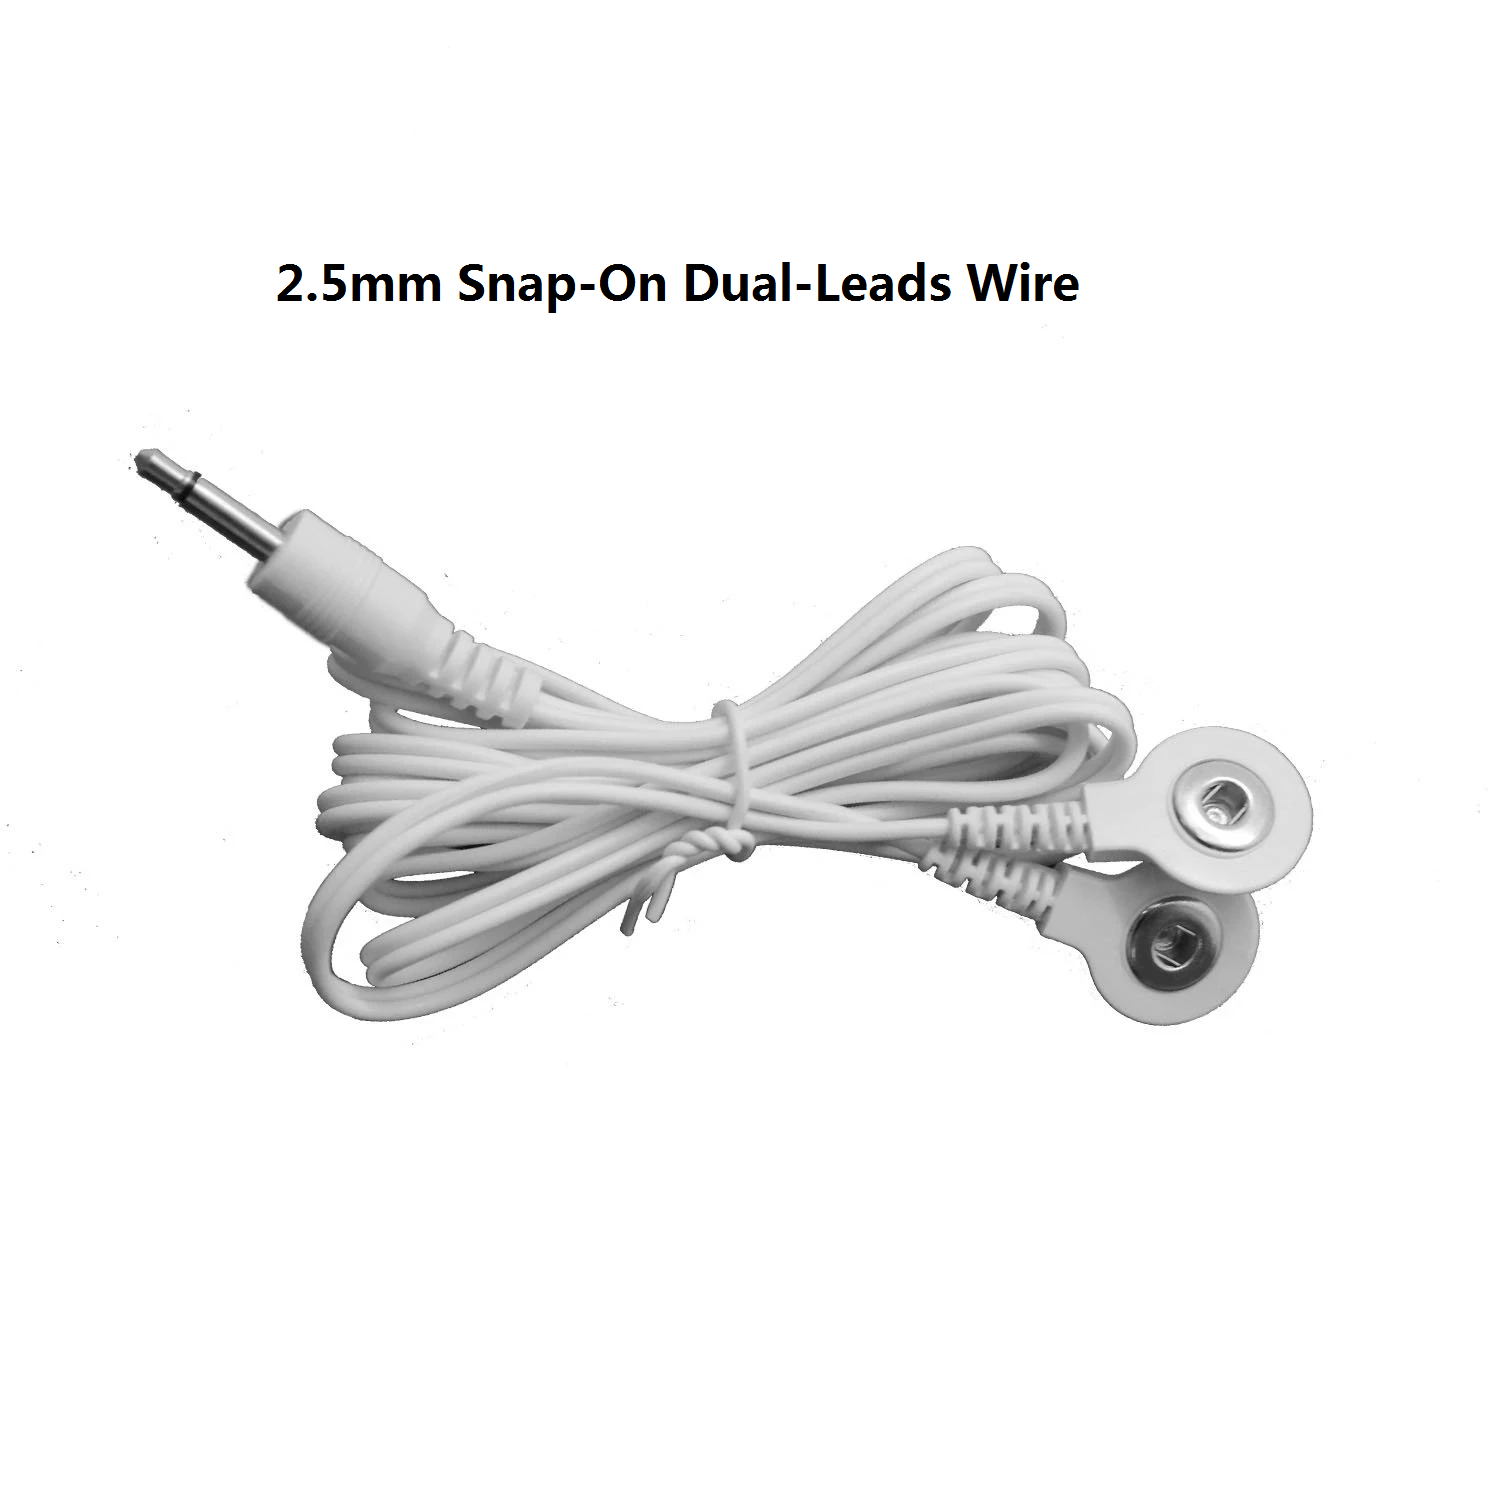 2 Sets of Snap-On Dual-Leads Electrode Wires - HealthmateForever.com